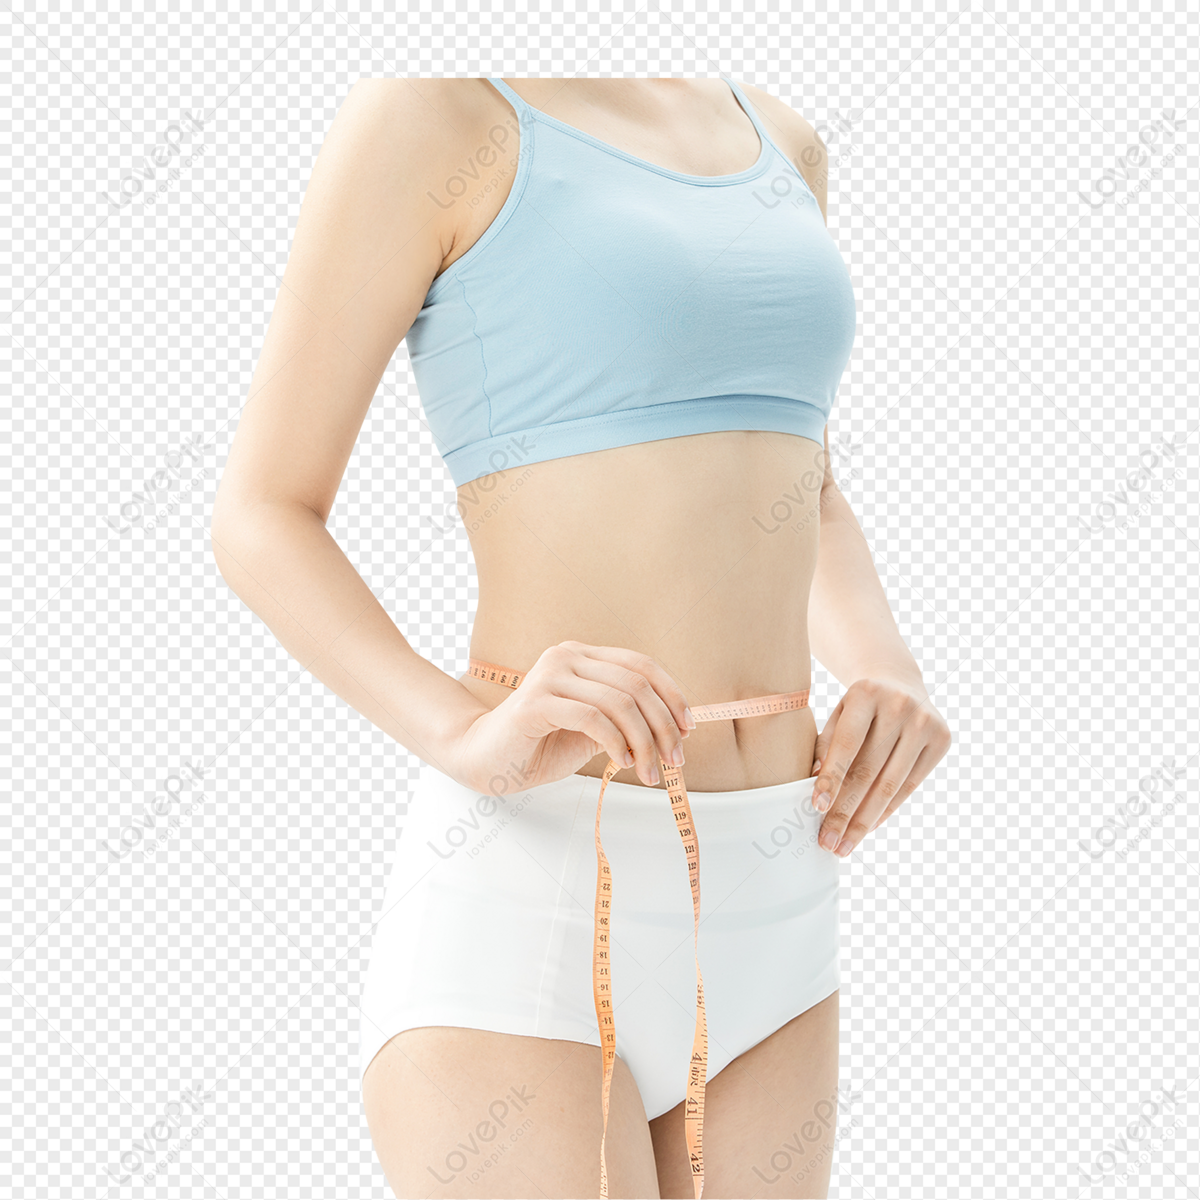 Slimming Body, Weight Loss, Material, Free Element PNG Free